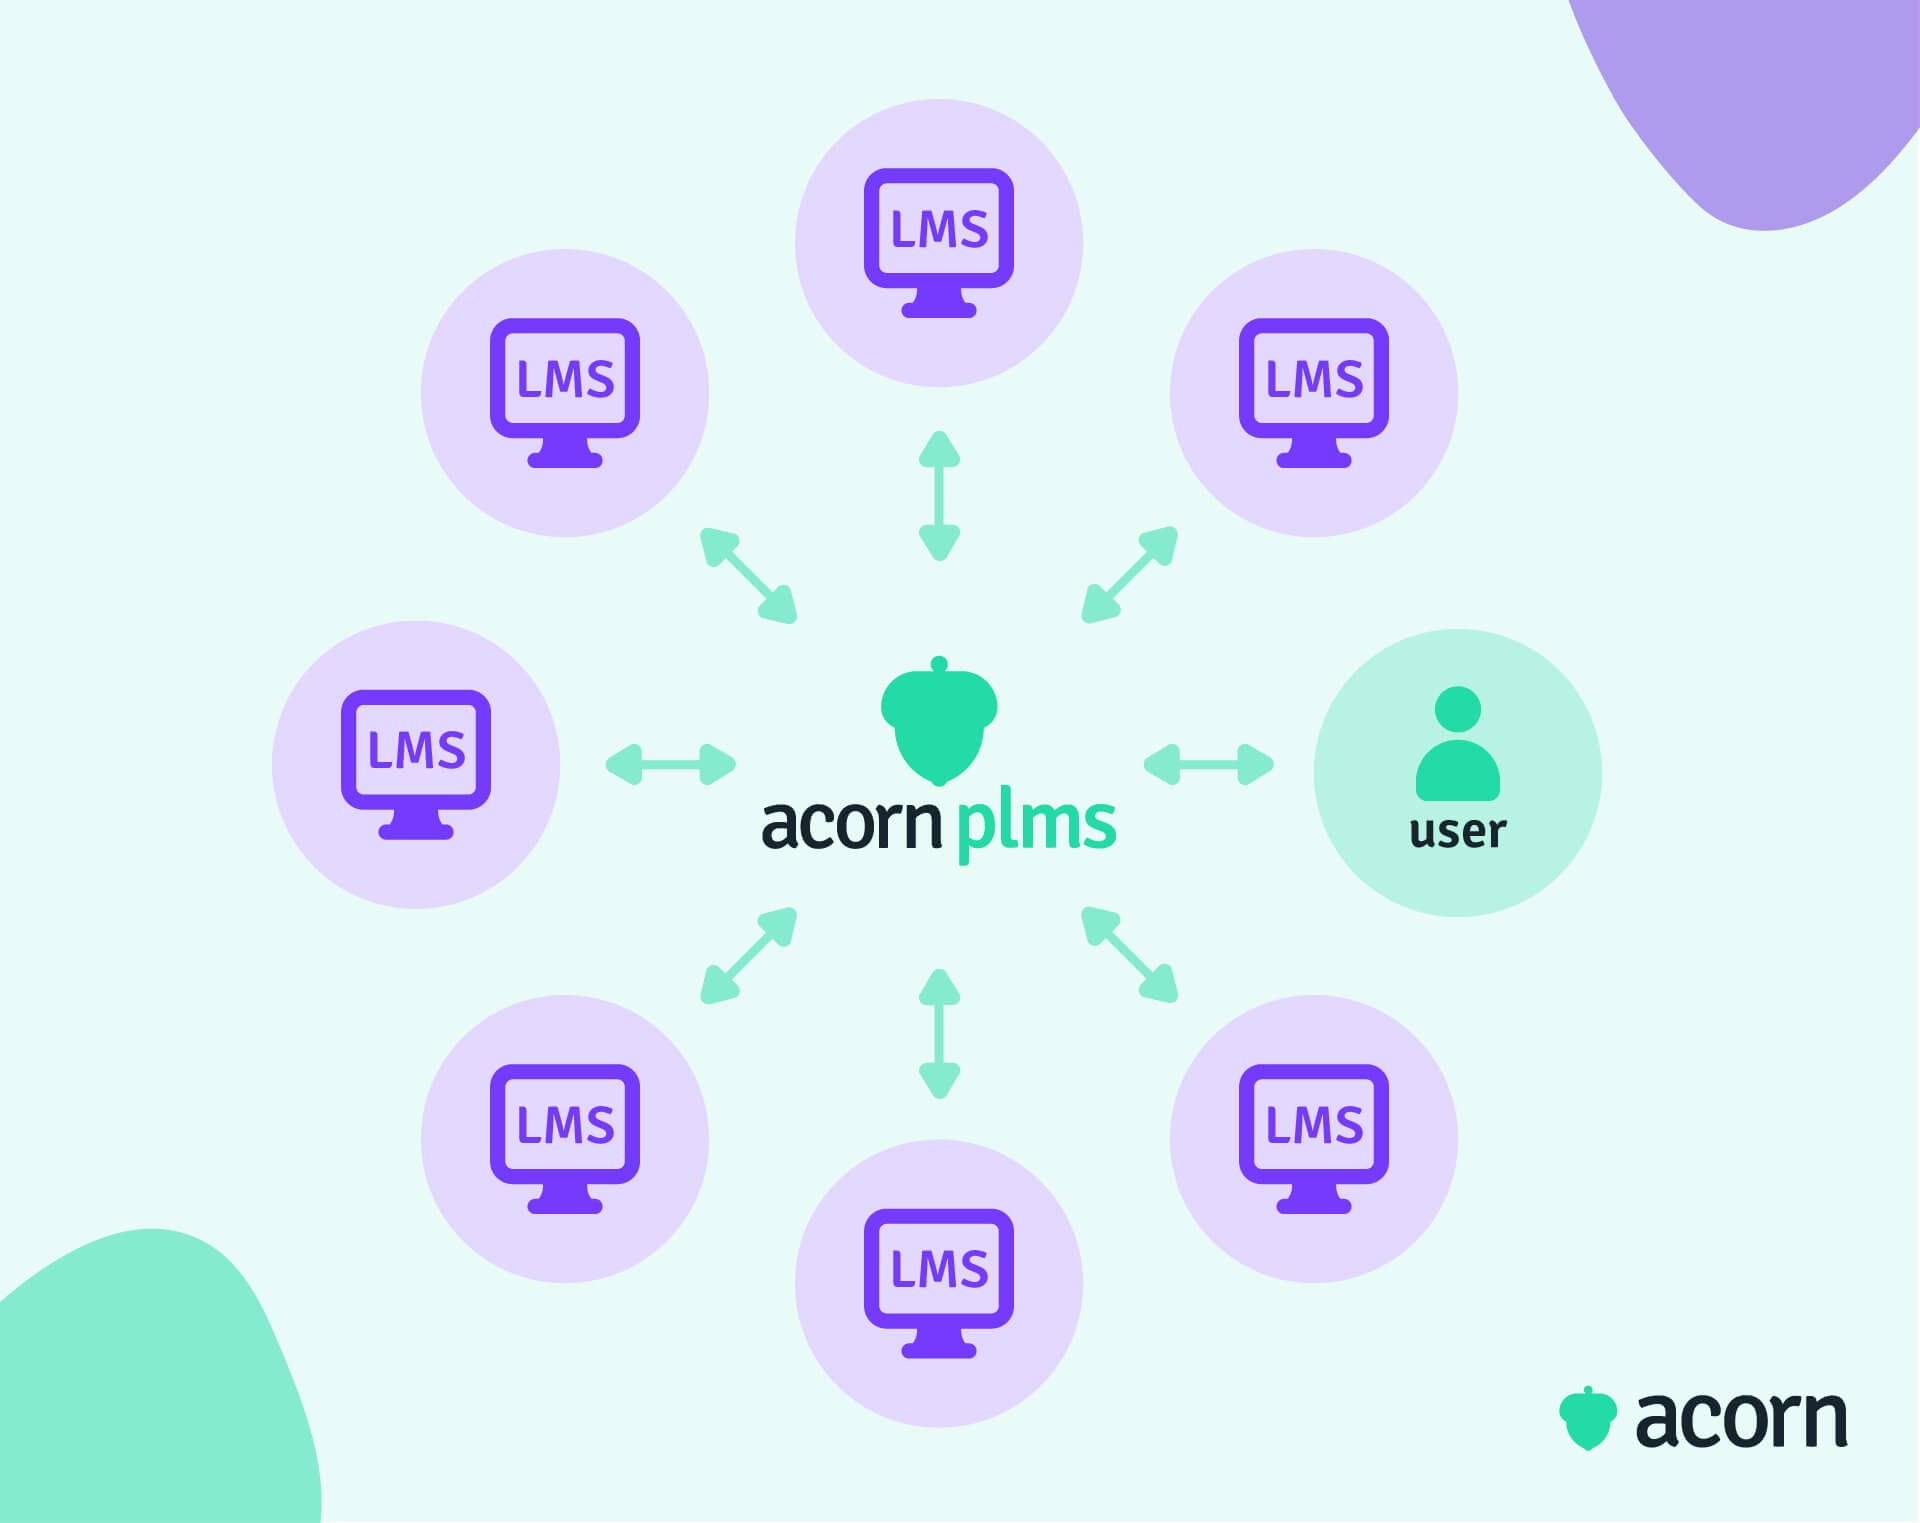 Infographic of how Acorn PLMS enables remote dispatch between LMSs